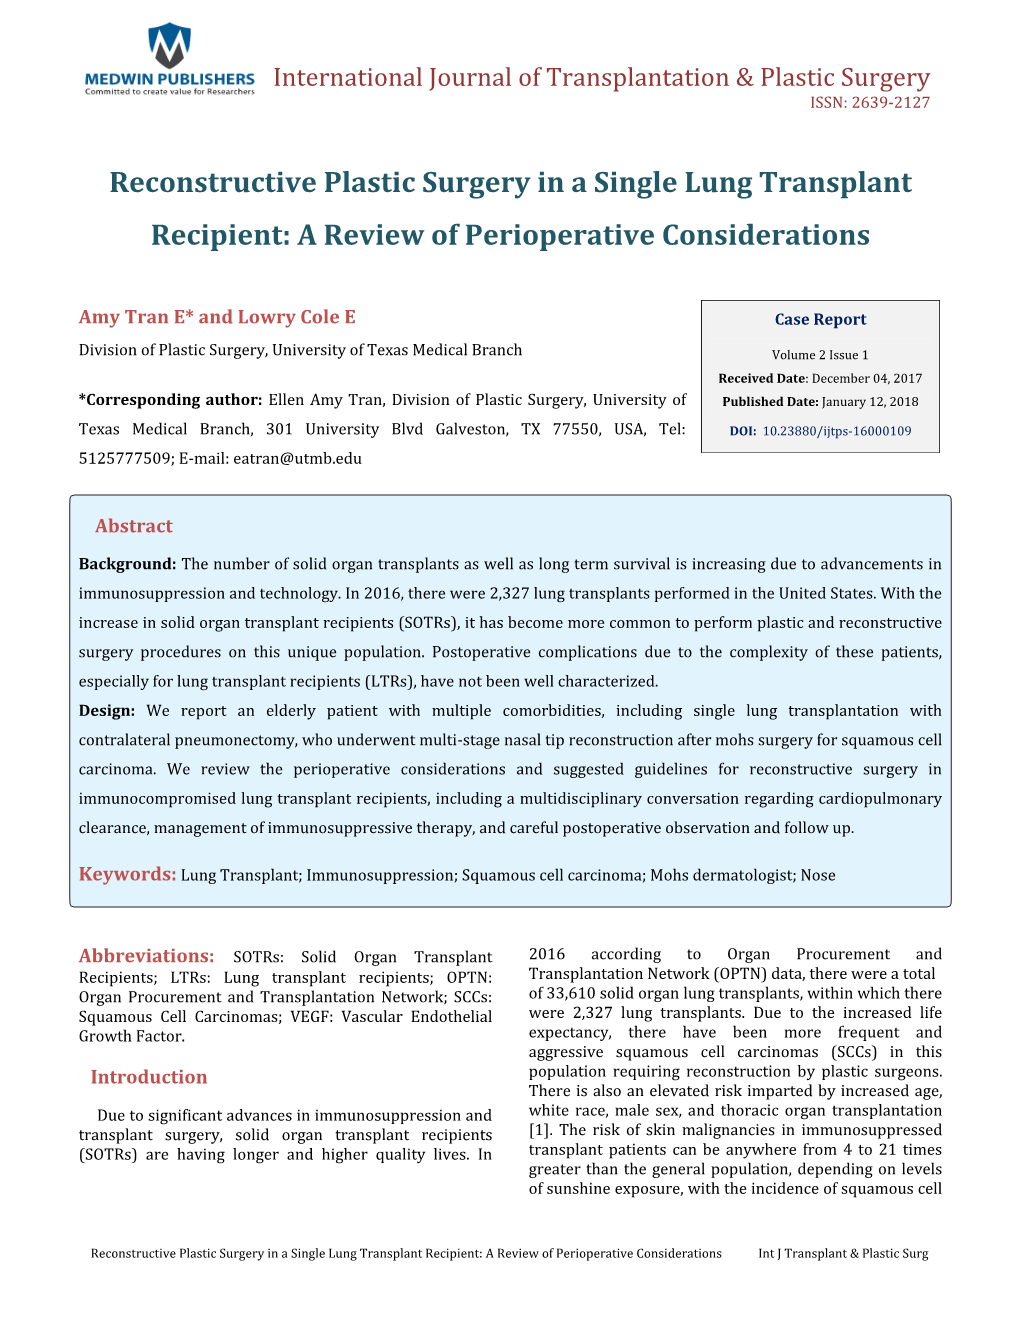 Reconstructive Plastic Surgery in a Single Lung Transplant Recipient: a Review of Perioperative Considerations